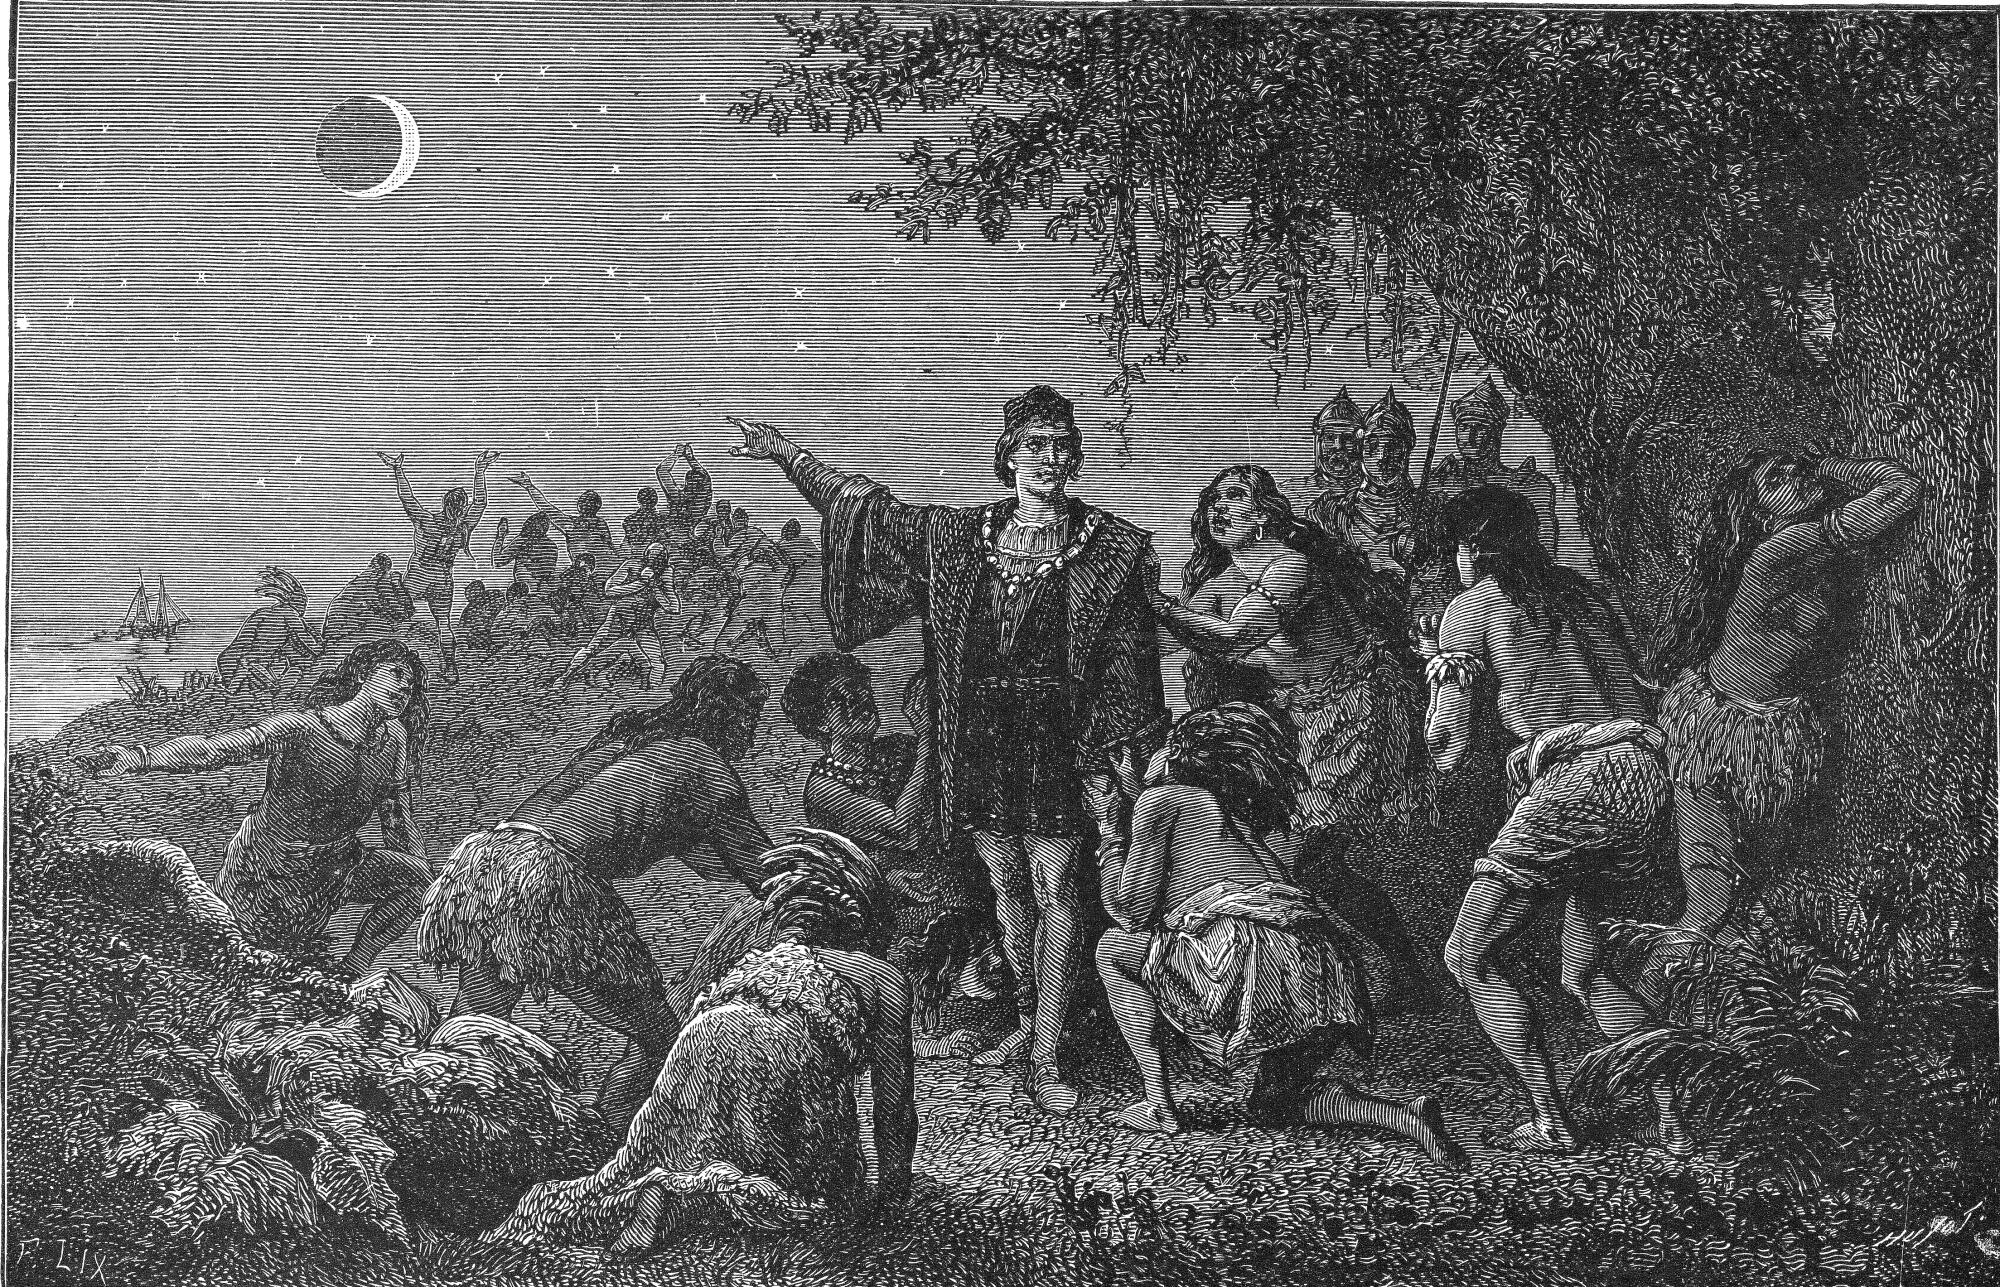  A sketch of Columbus pointing toward a lunar eclipse surrounded by people kneeling